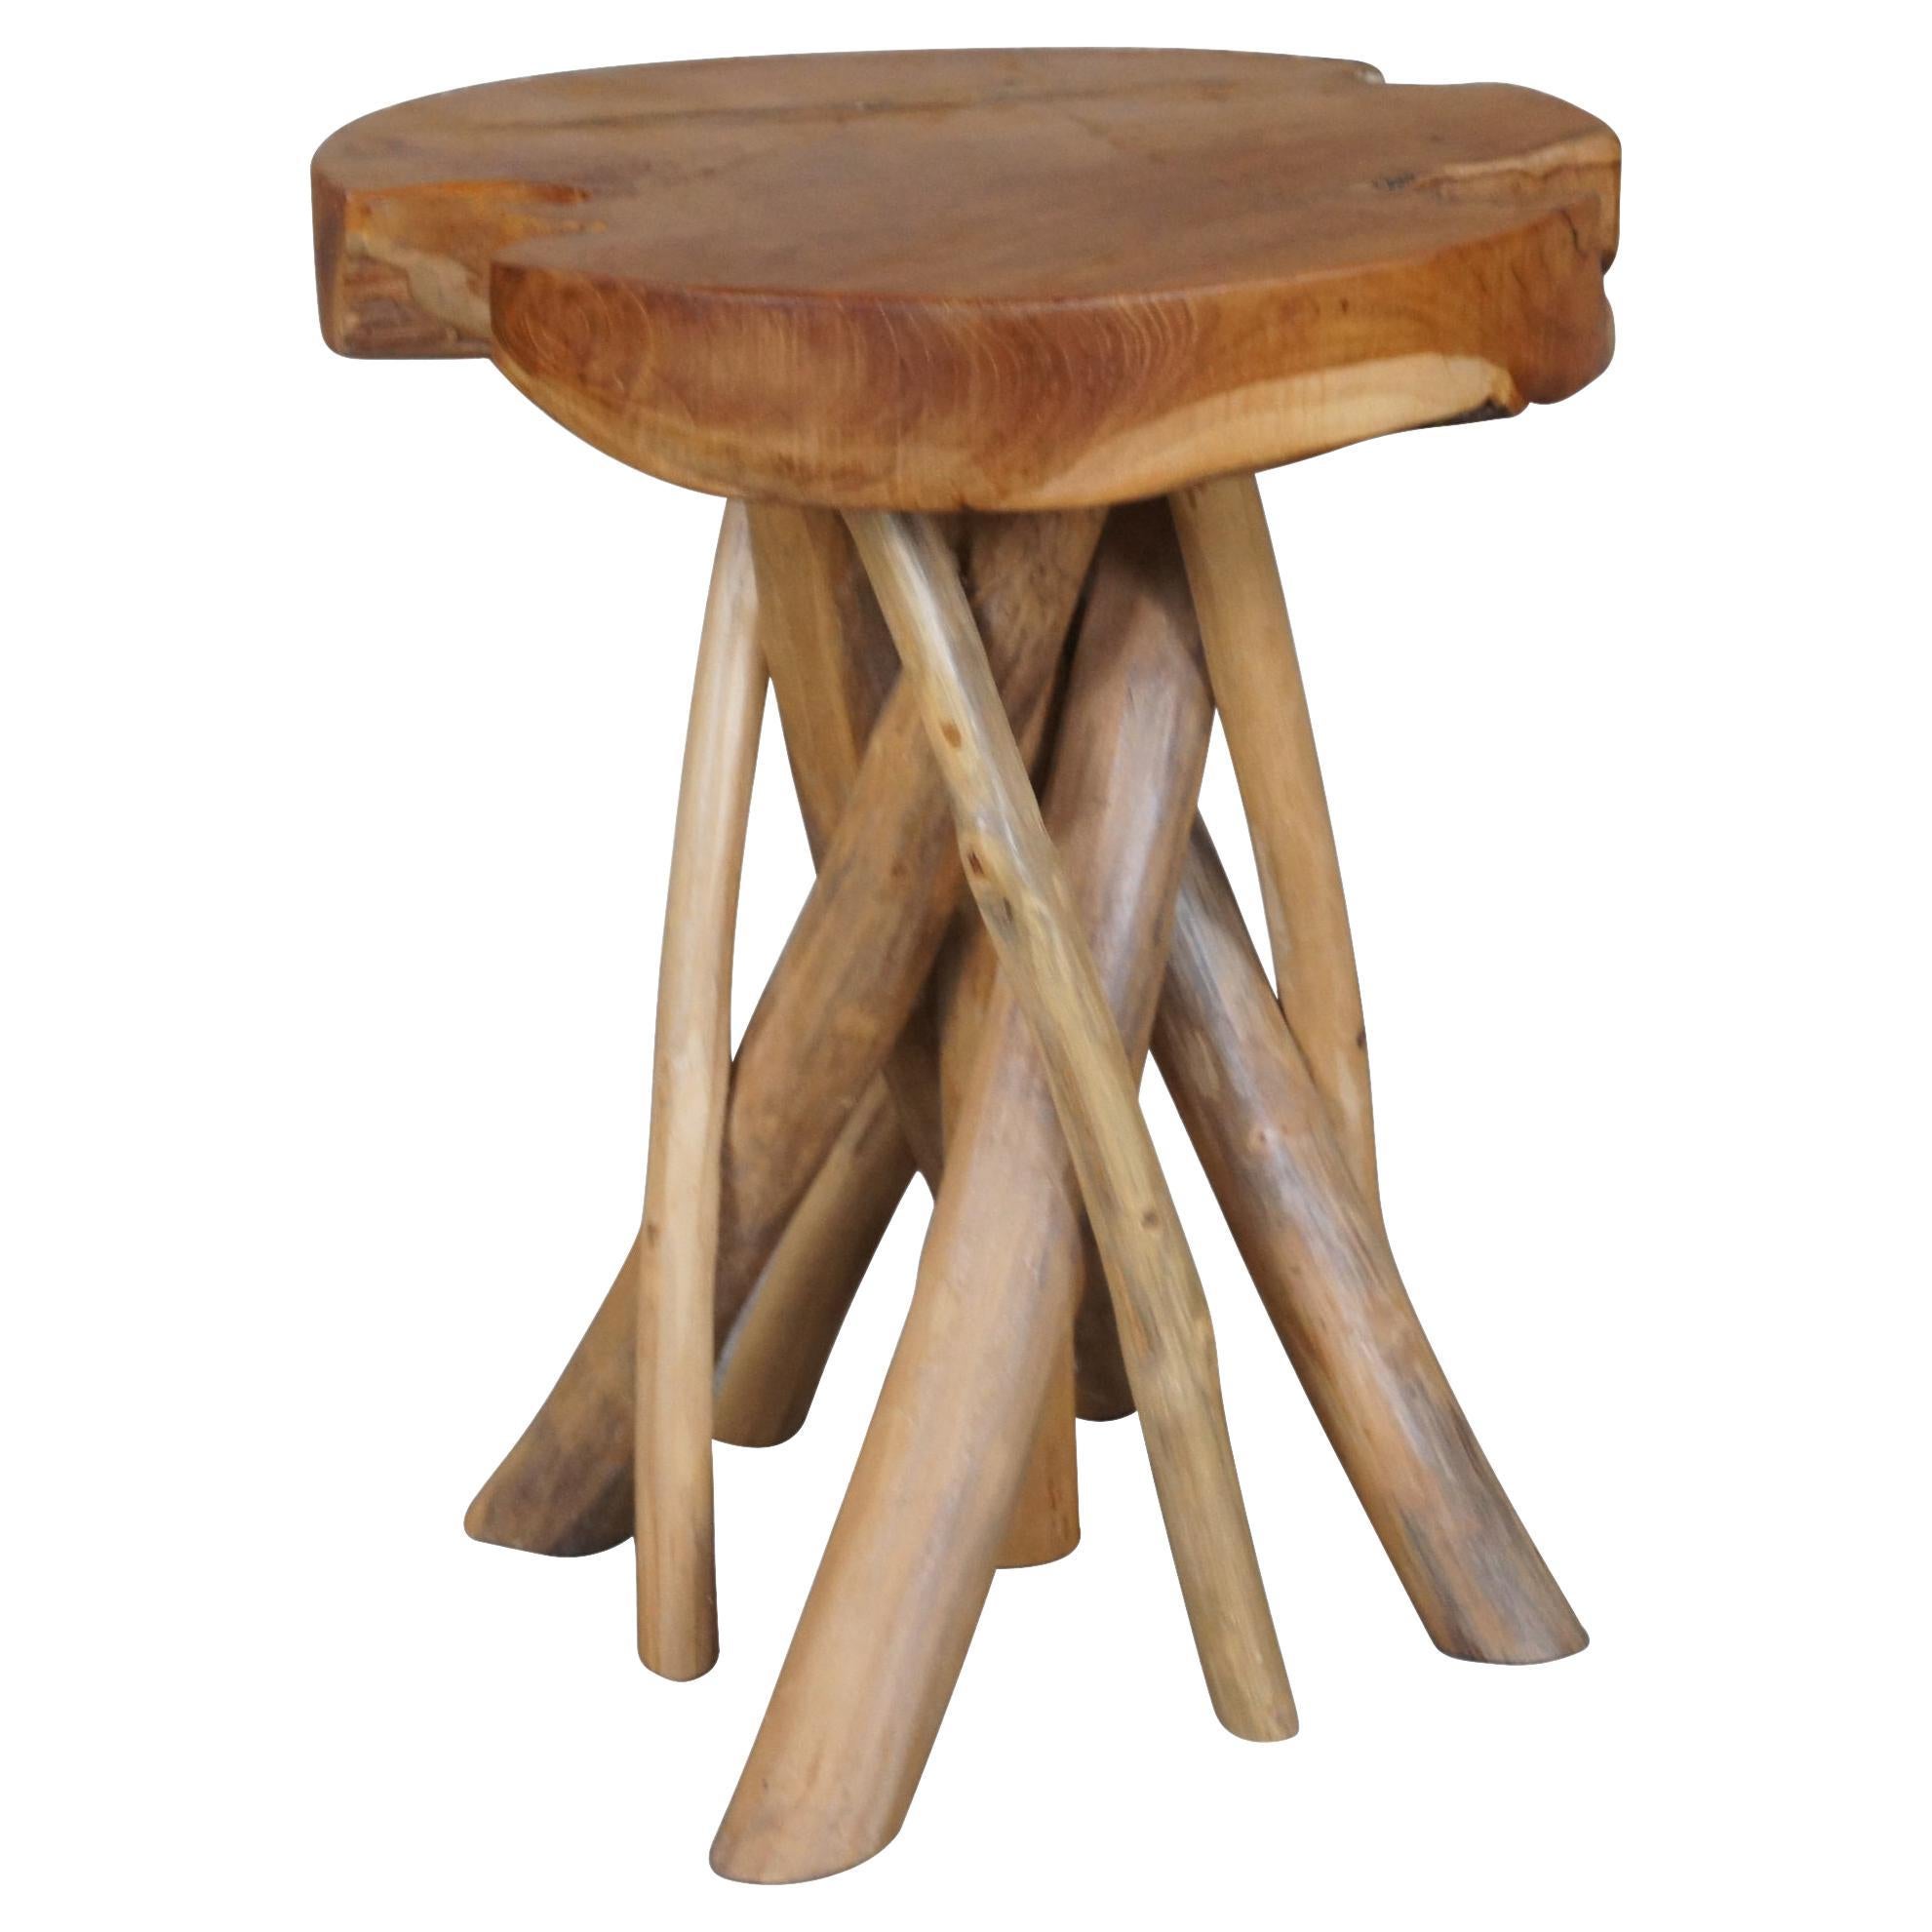 Rustic Adirondack Farmhouse Country Scalloped Slab Side Table Branch Base Stool For Sale